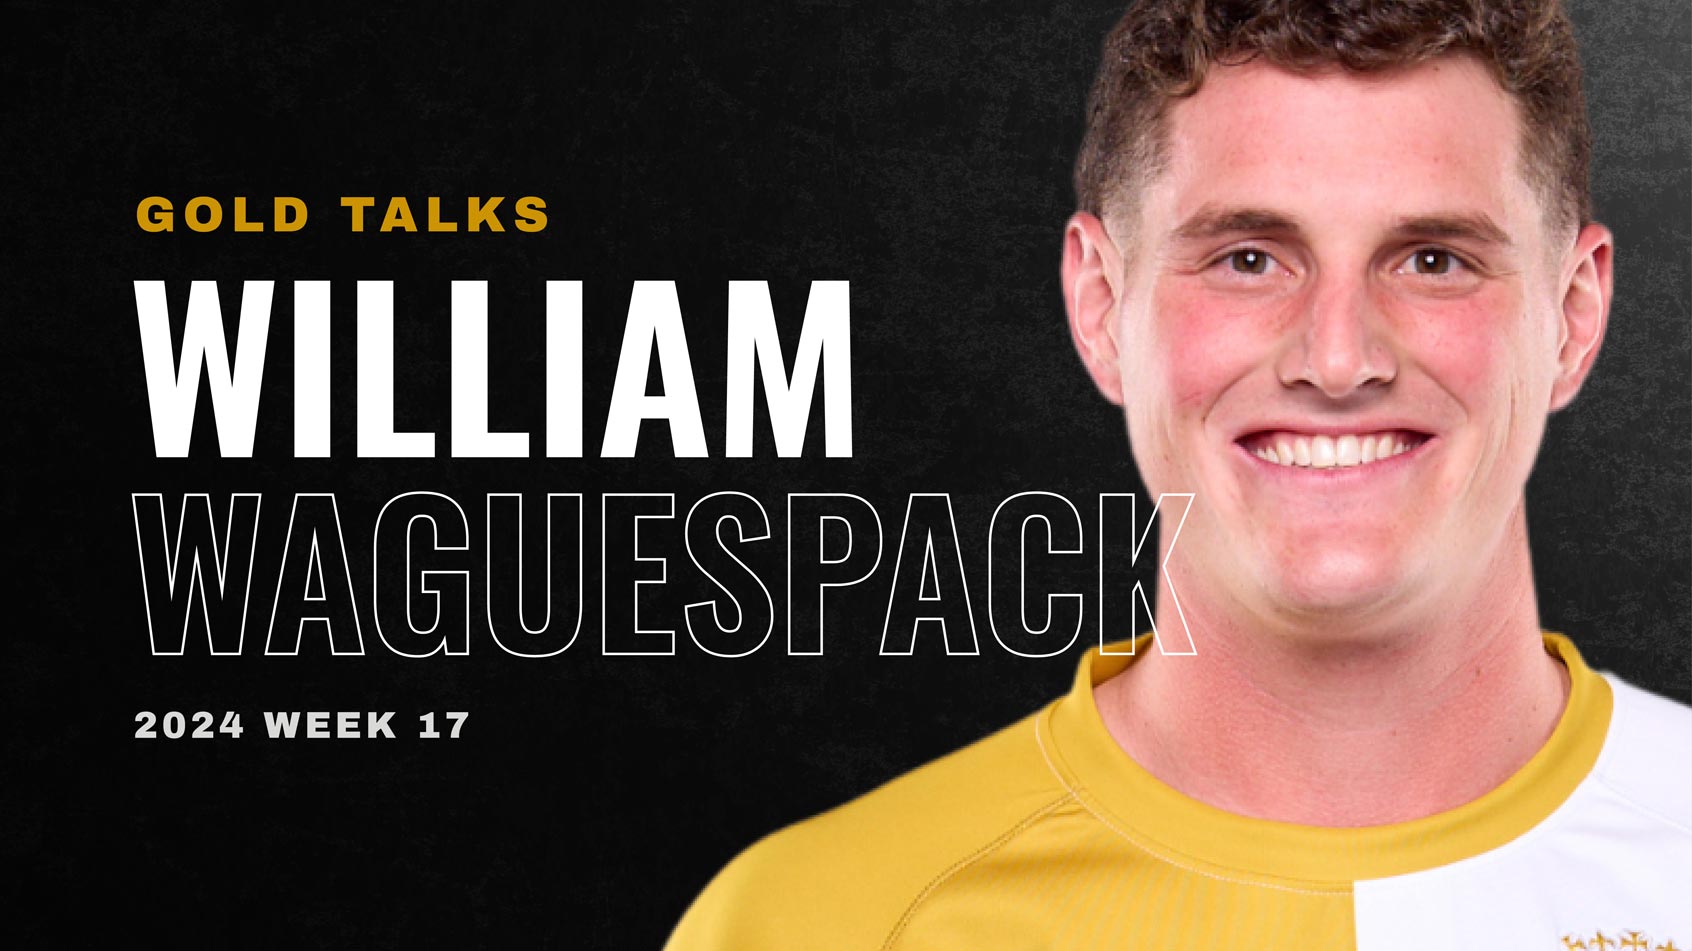 GOLD TALKS: William Waguespack Shares His Inspiring Rugby Journey